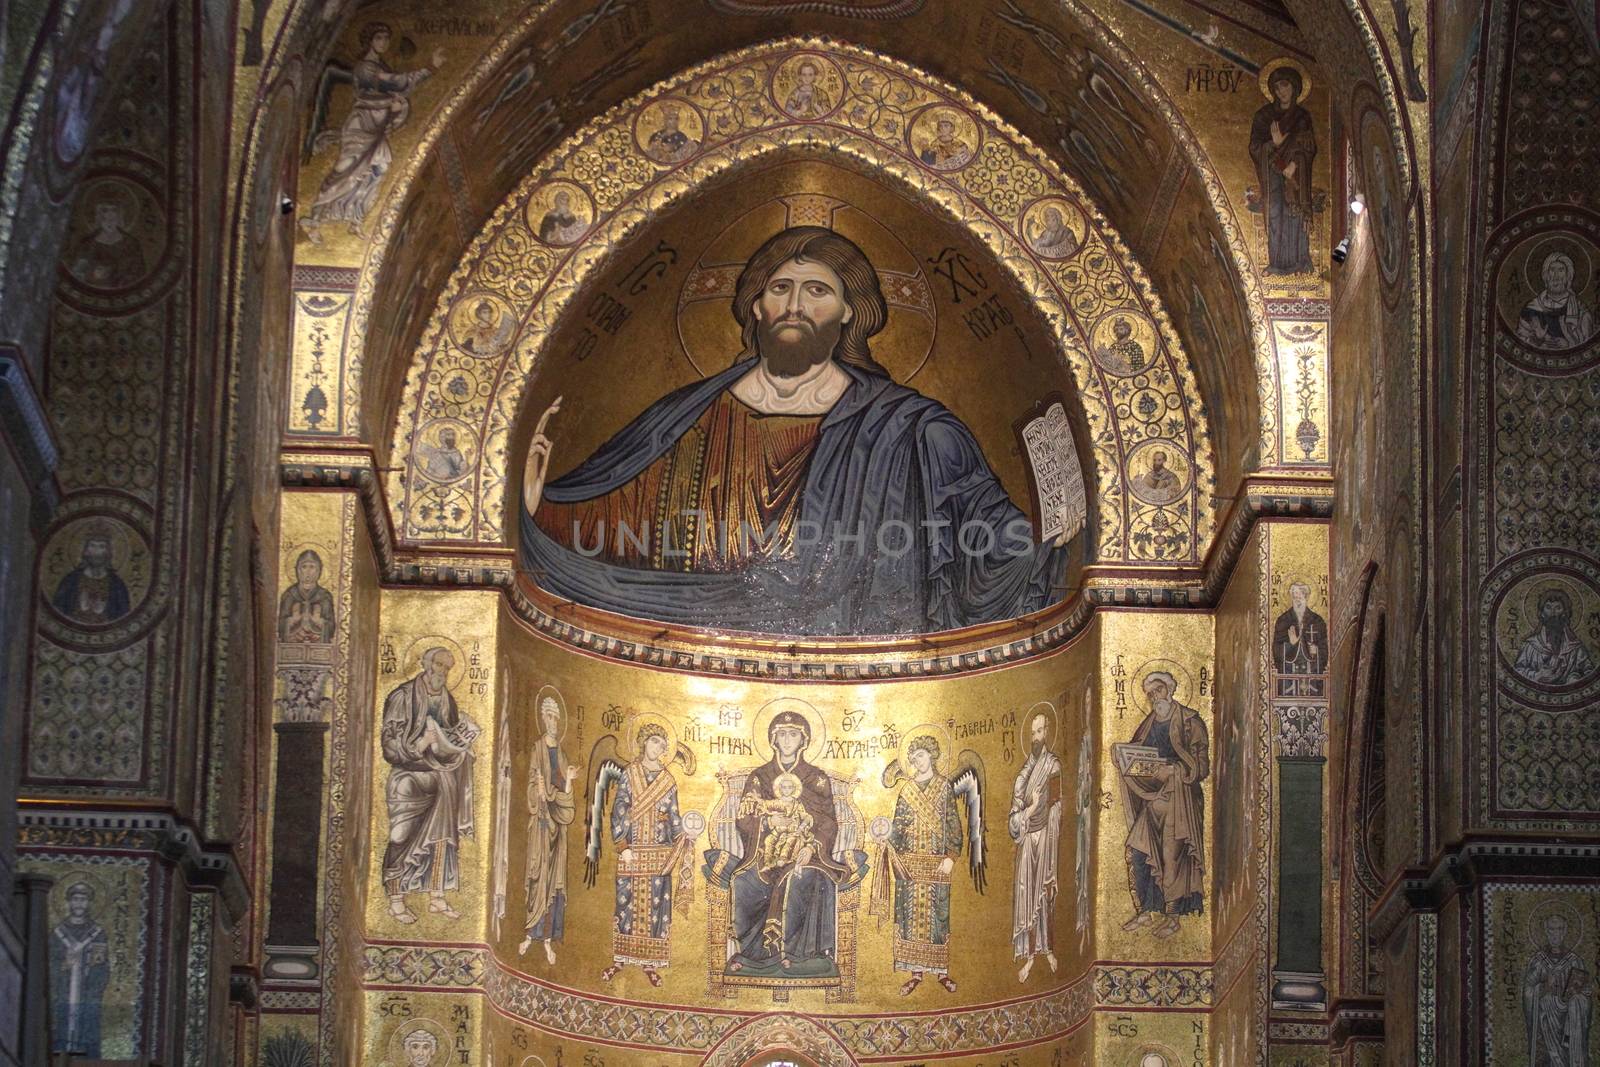 Monreale, Italy - 3 July 2016: The Christ Pantocrator in the Cathedral of Monreale